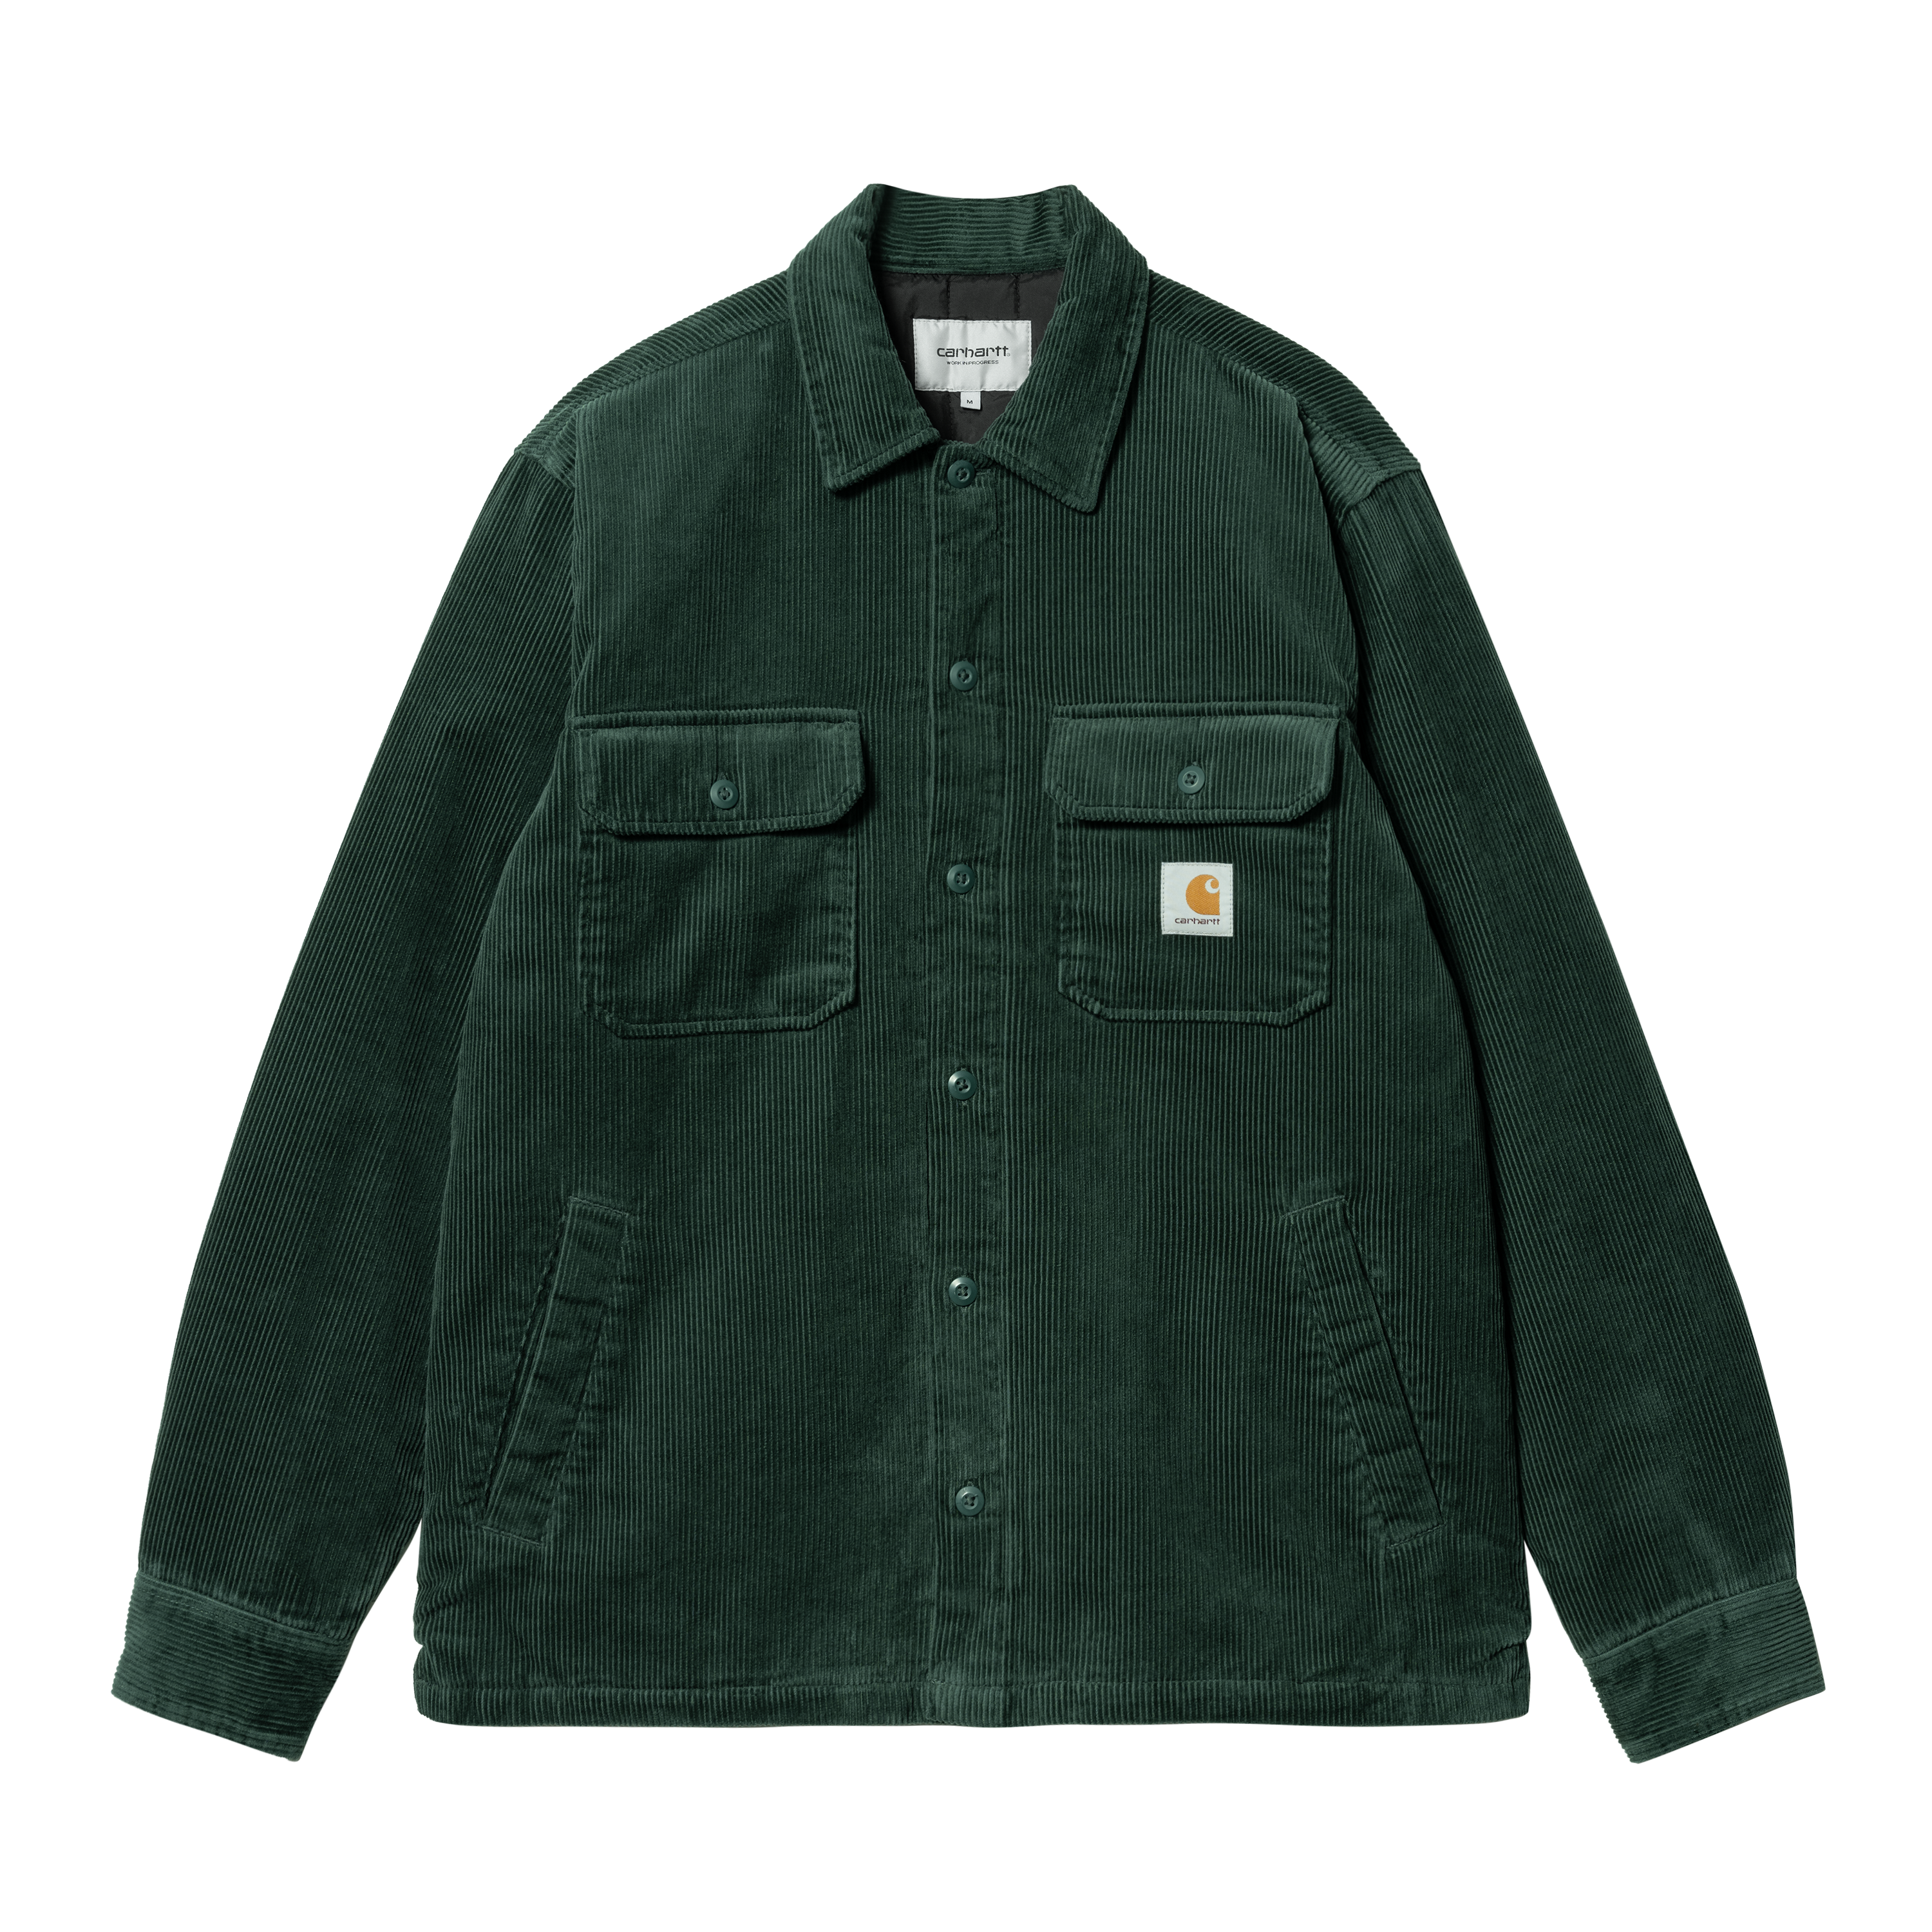 Carhartt WIP - WHITSOME SHIRT JACKET -Discovery Green